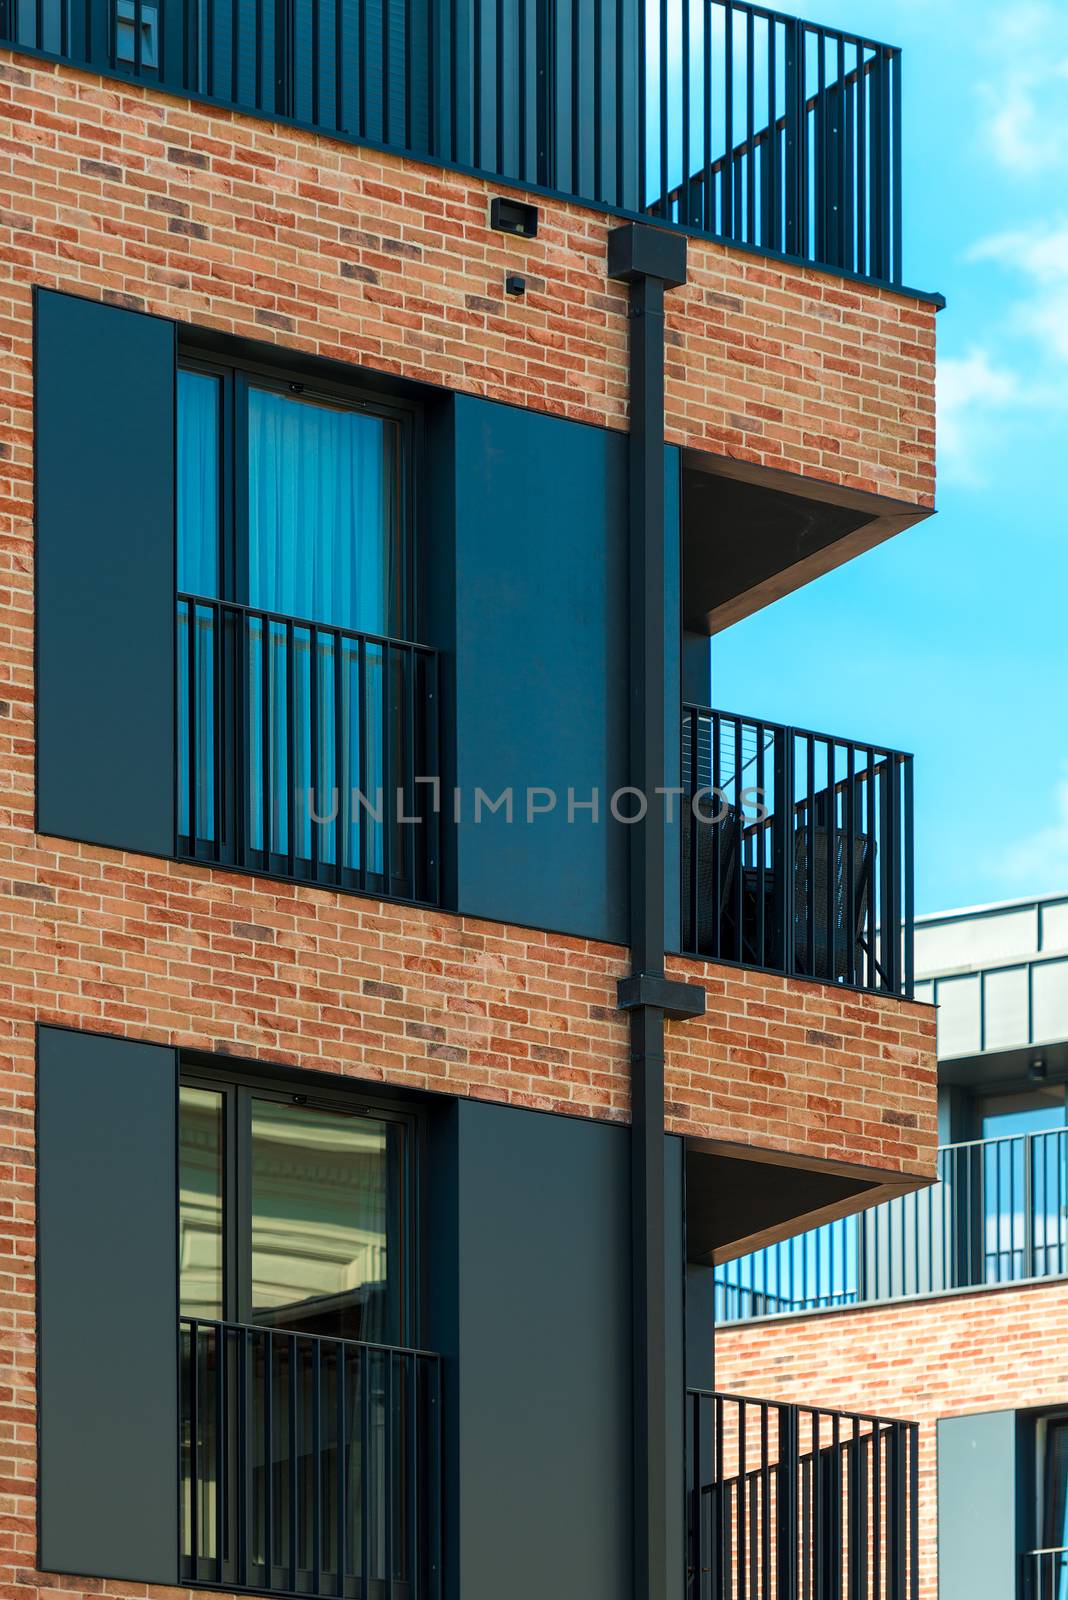 elements of a modern brick building - balconies and windows